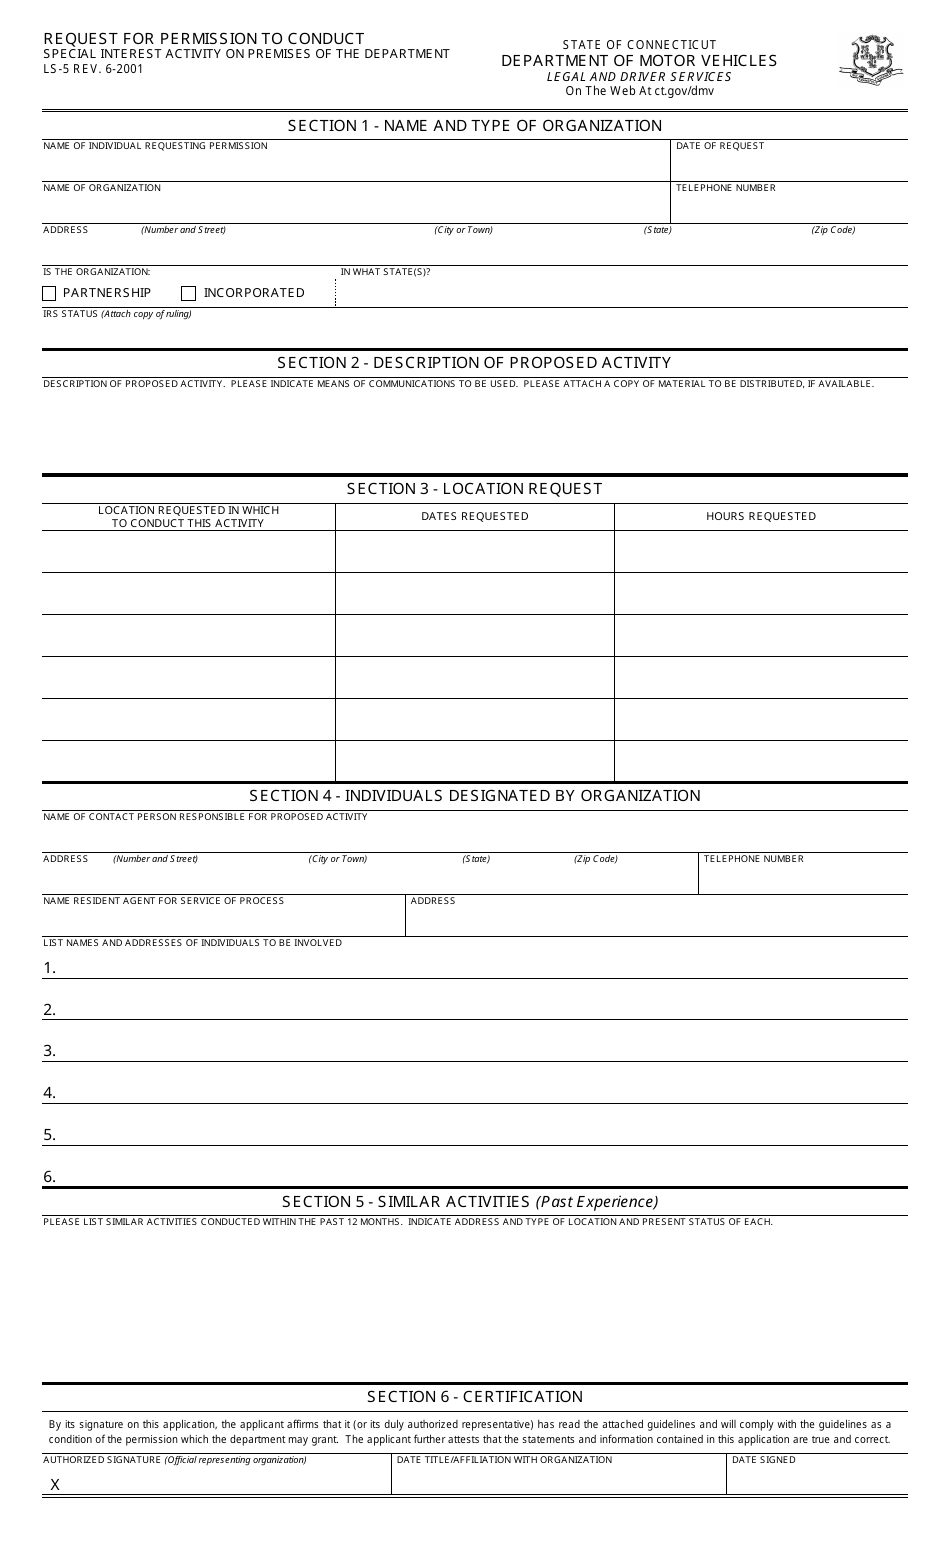 Form LS-5 Request for Permission to Conduct Special Activities on DMV Premises - Connecticut, Page 1